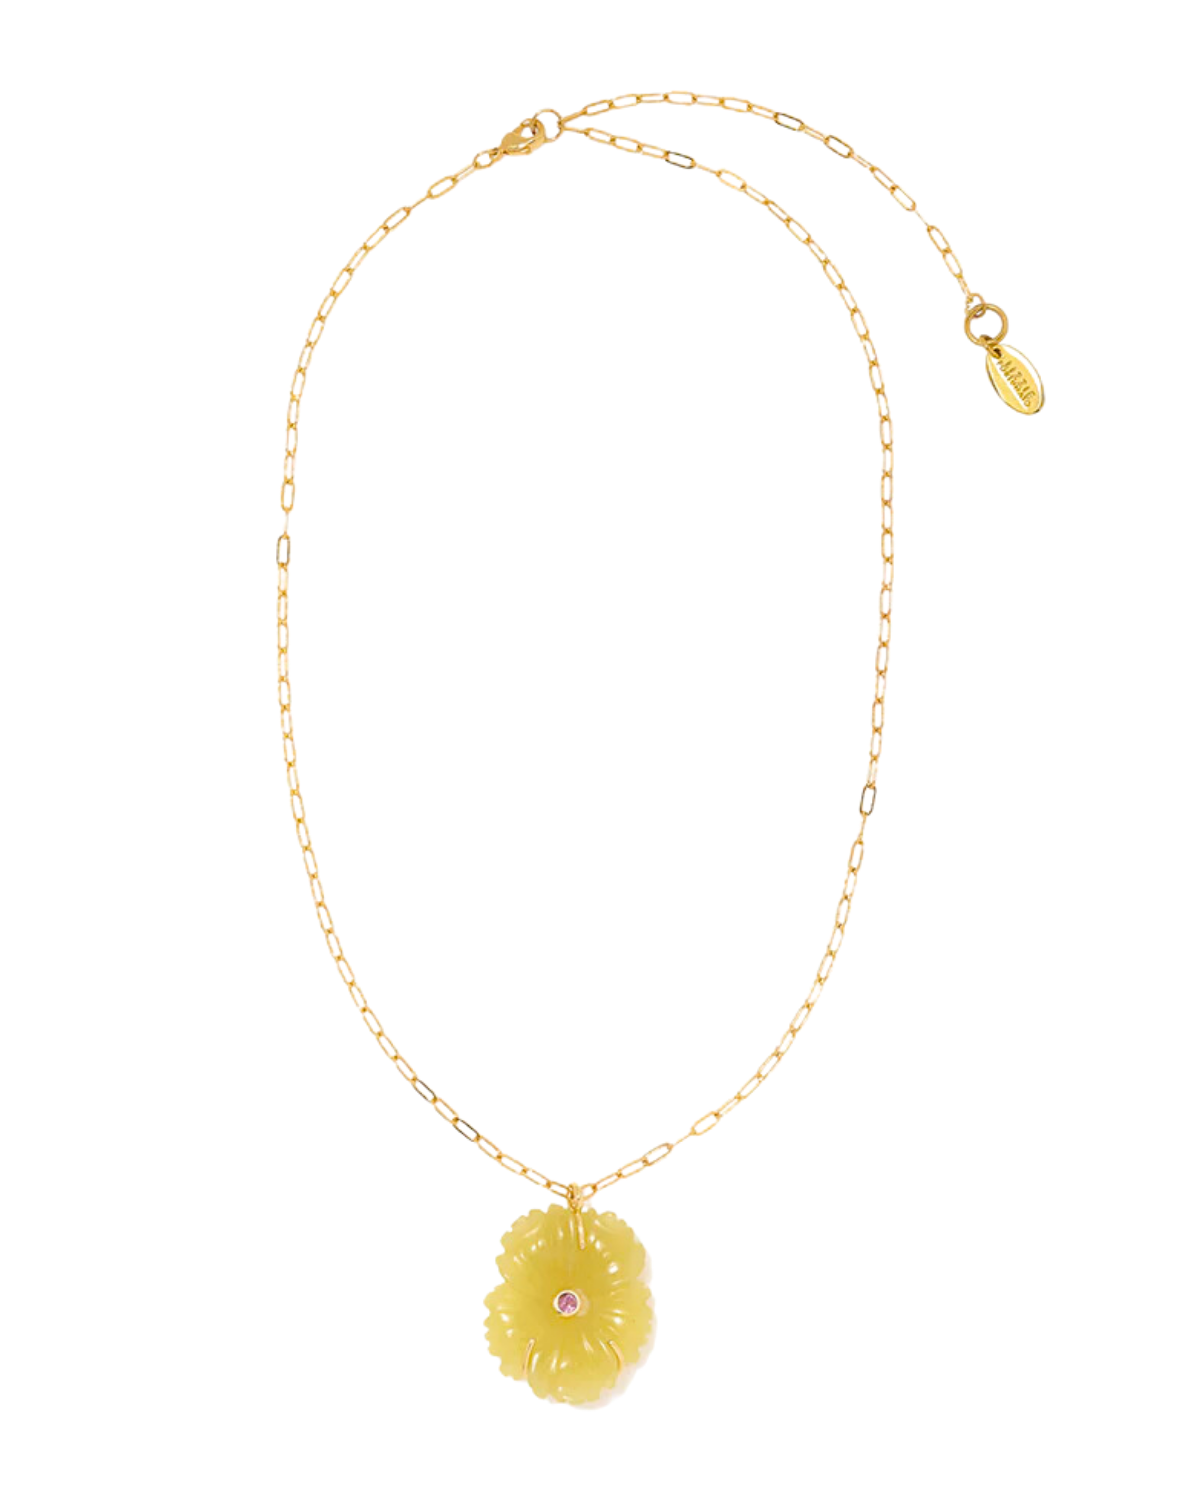 New Bloom Necklace (Canary)